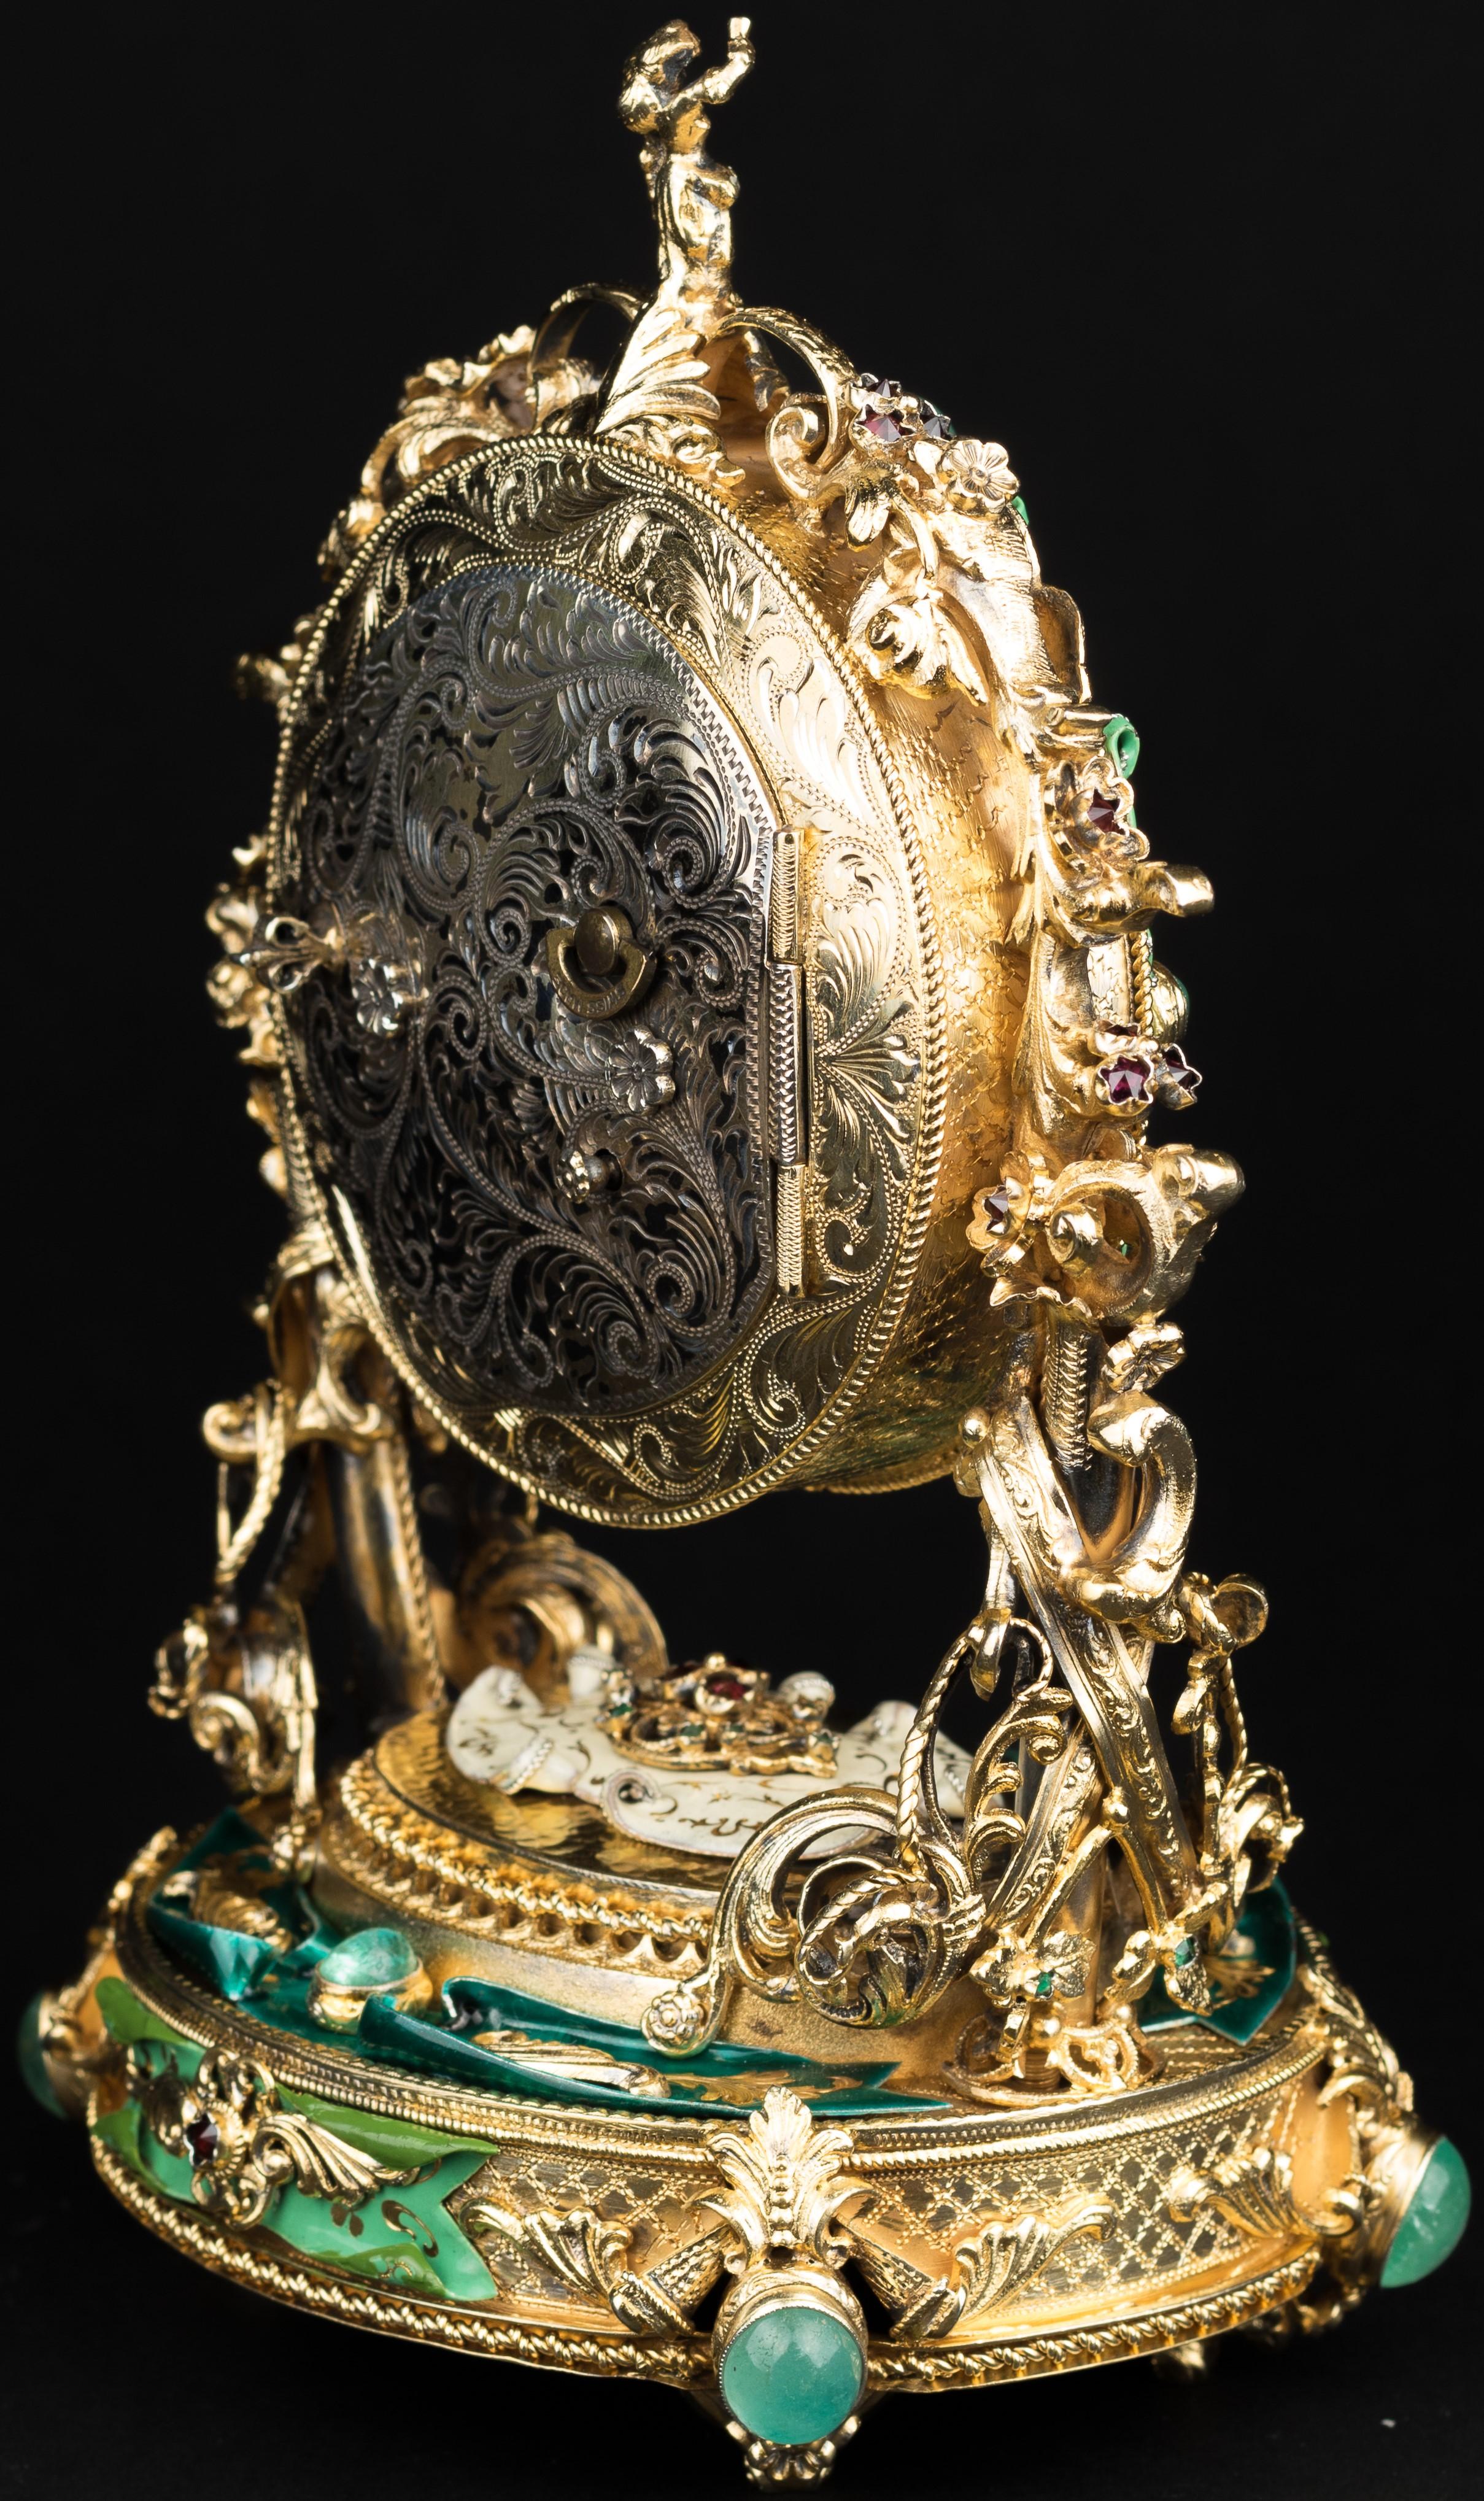 Austrian silver-gilt clock with green enamel, 20th century. The back is engraved with scrolls.